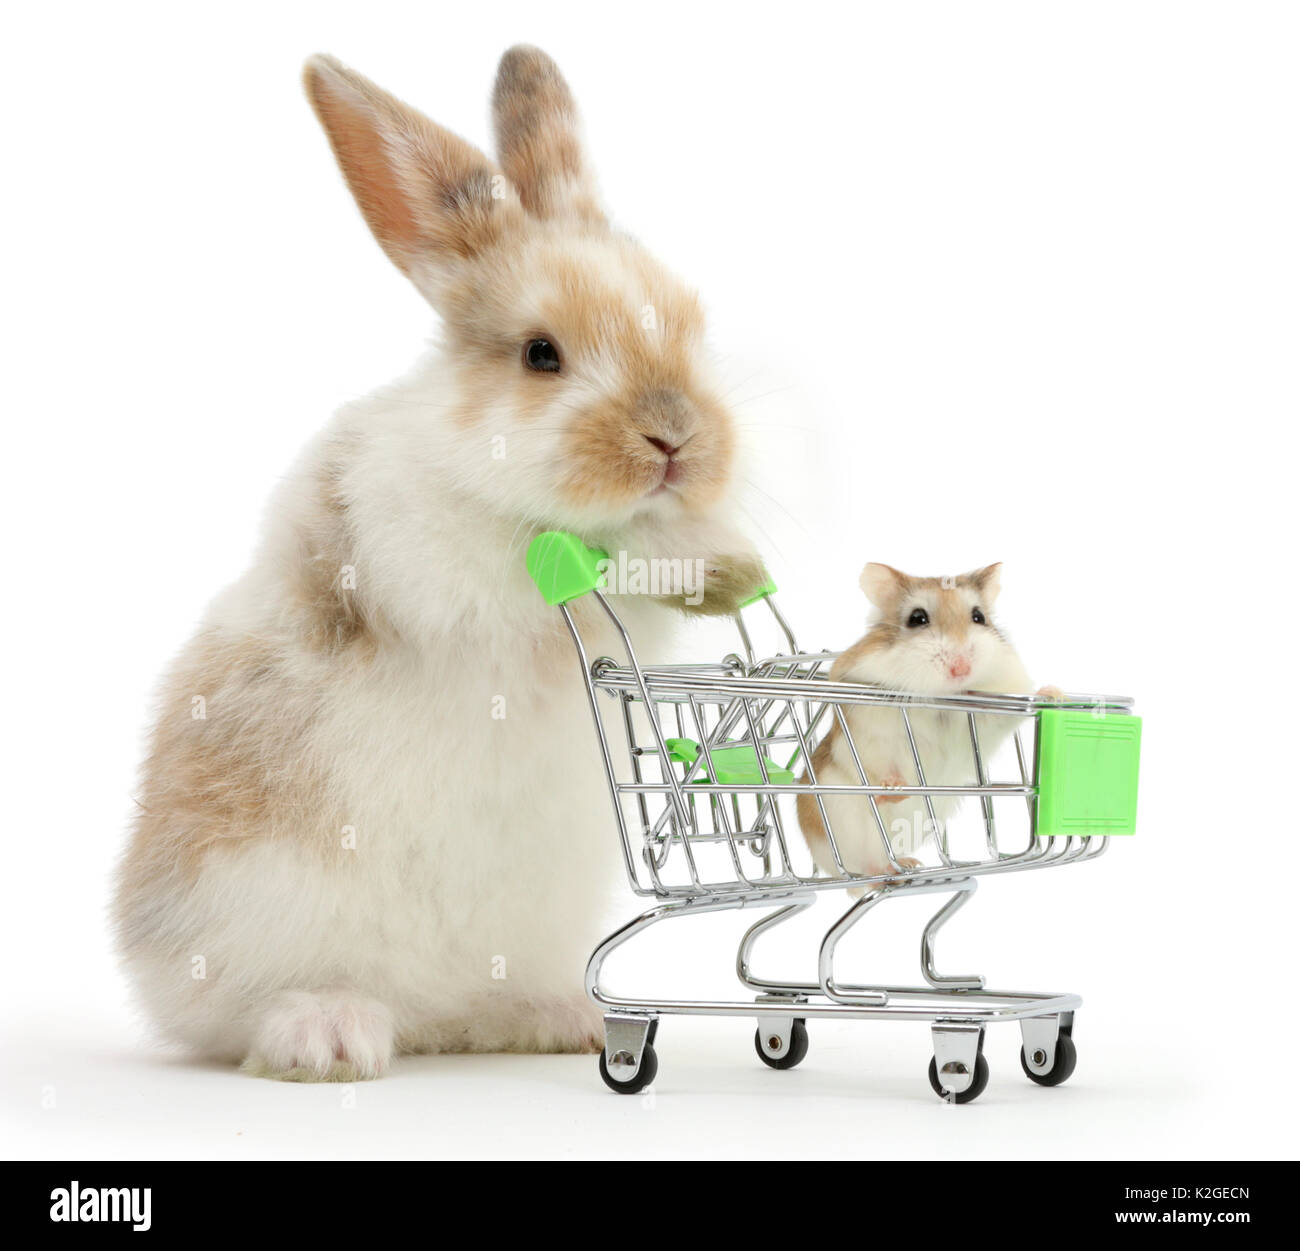 Young Rabbit with Roborovski hamster in shopping trolley. Stock Photo